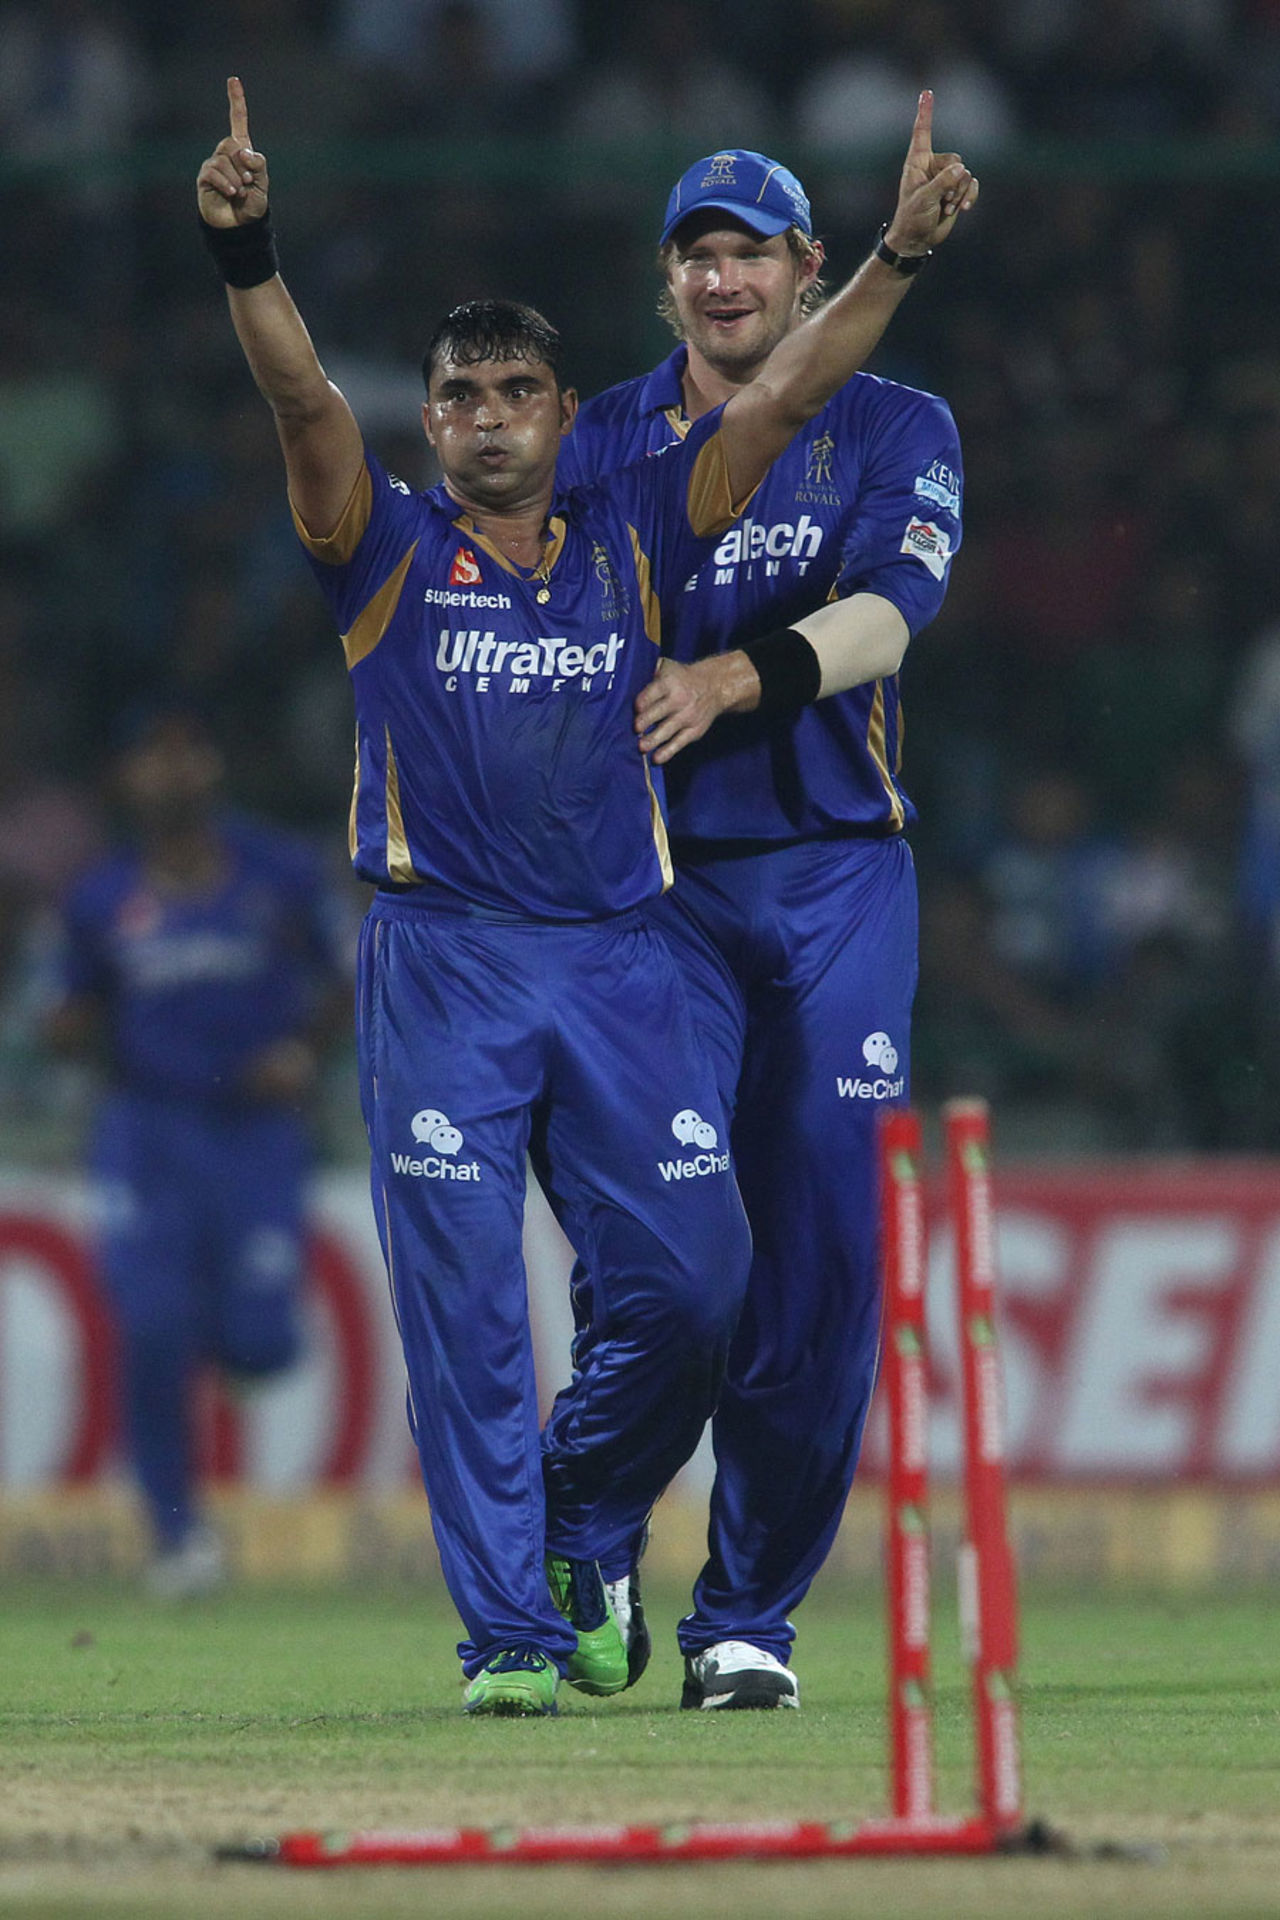 Pravin Tambe was economical and took two wickets, Mumbai Indians v Rajasthan Royals, Final, Champions League 2013, Delhi, October 6, 2013